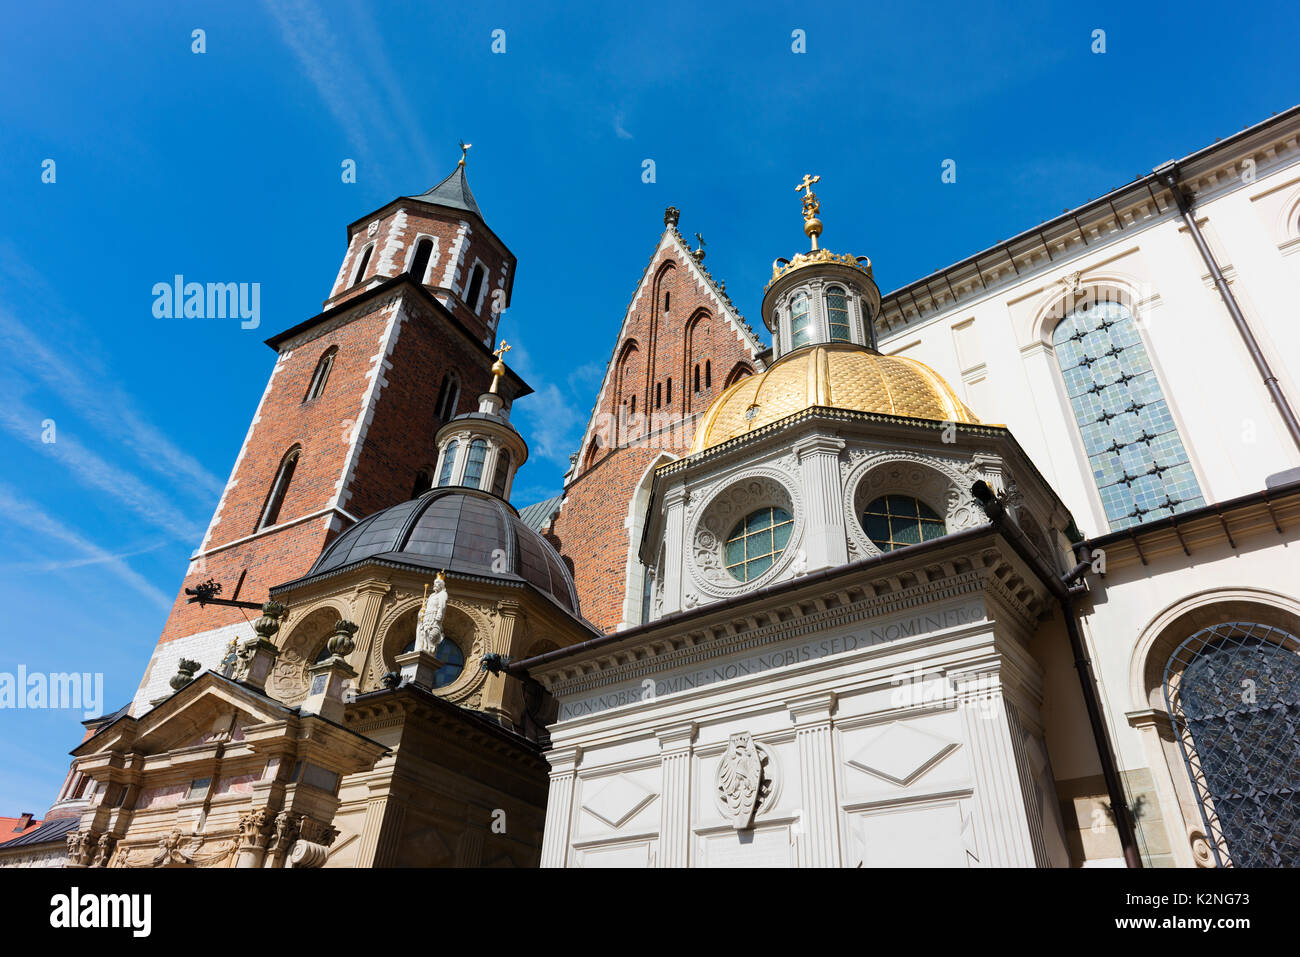 The cathedral within the medieval Wawel Castle. Stock Photo